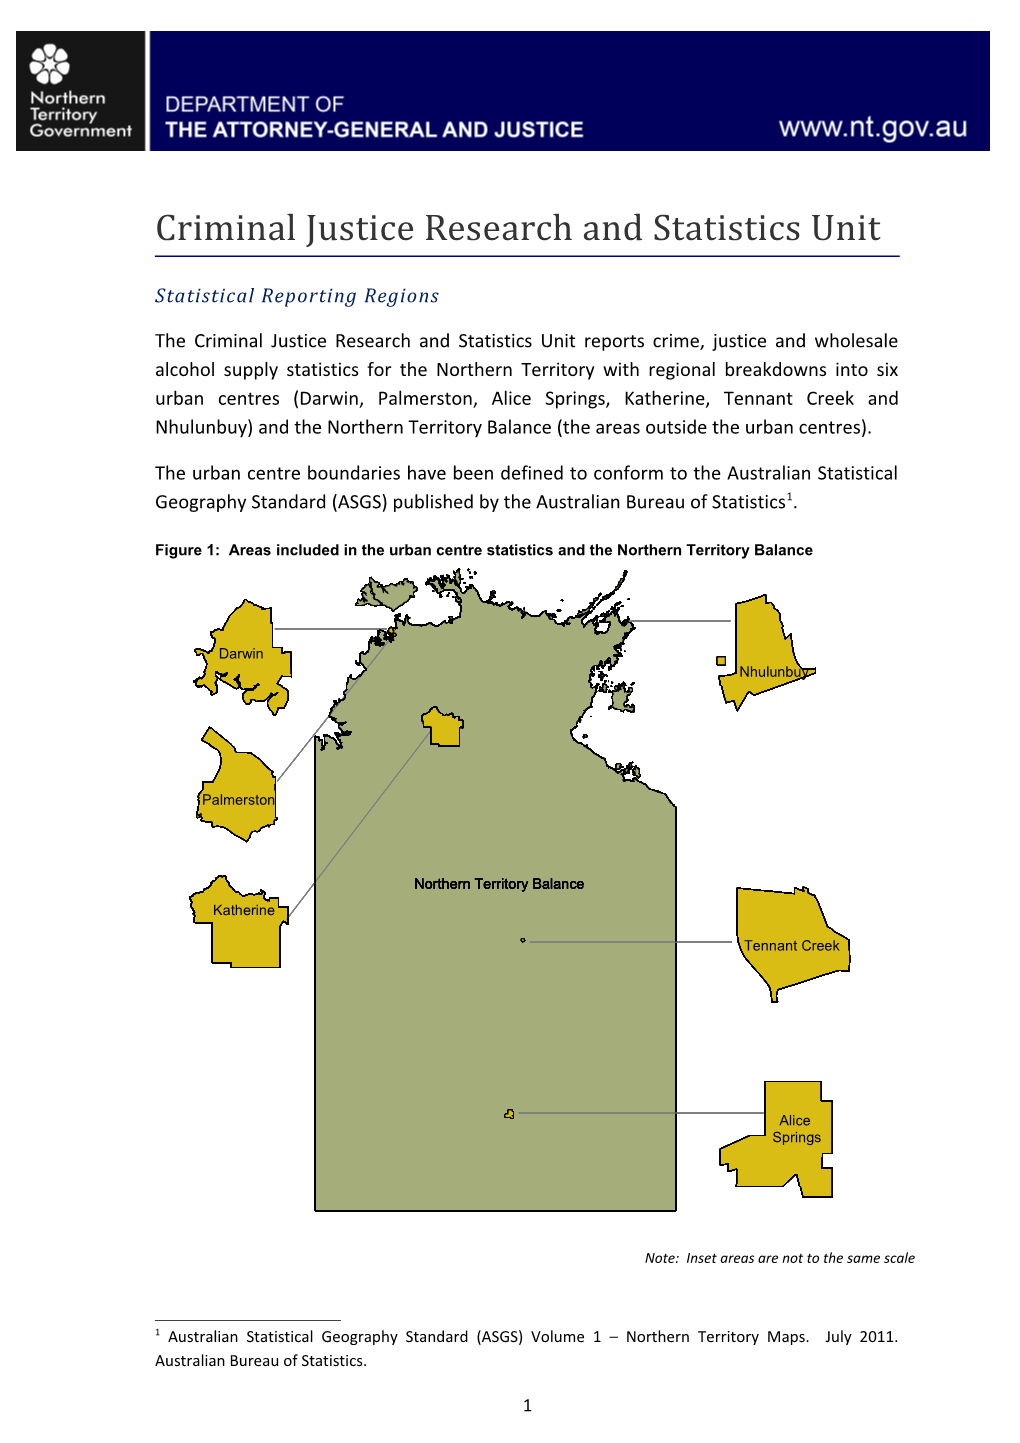 Northern Territory Crime and Justice Statistical Reporting Regions